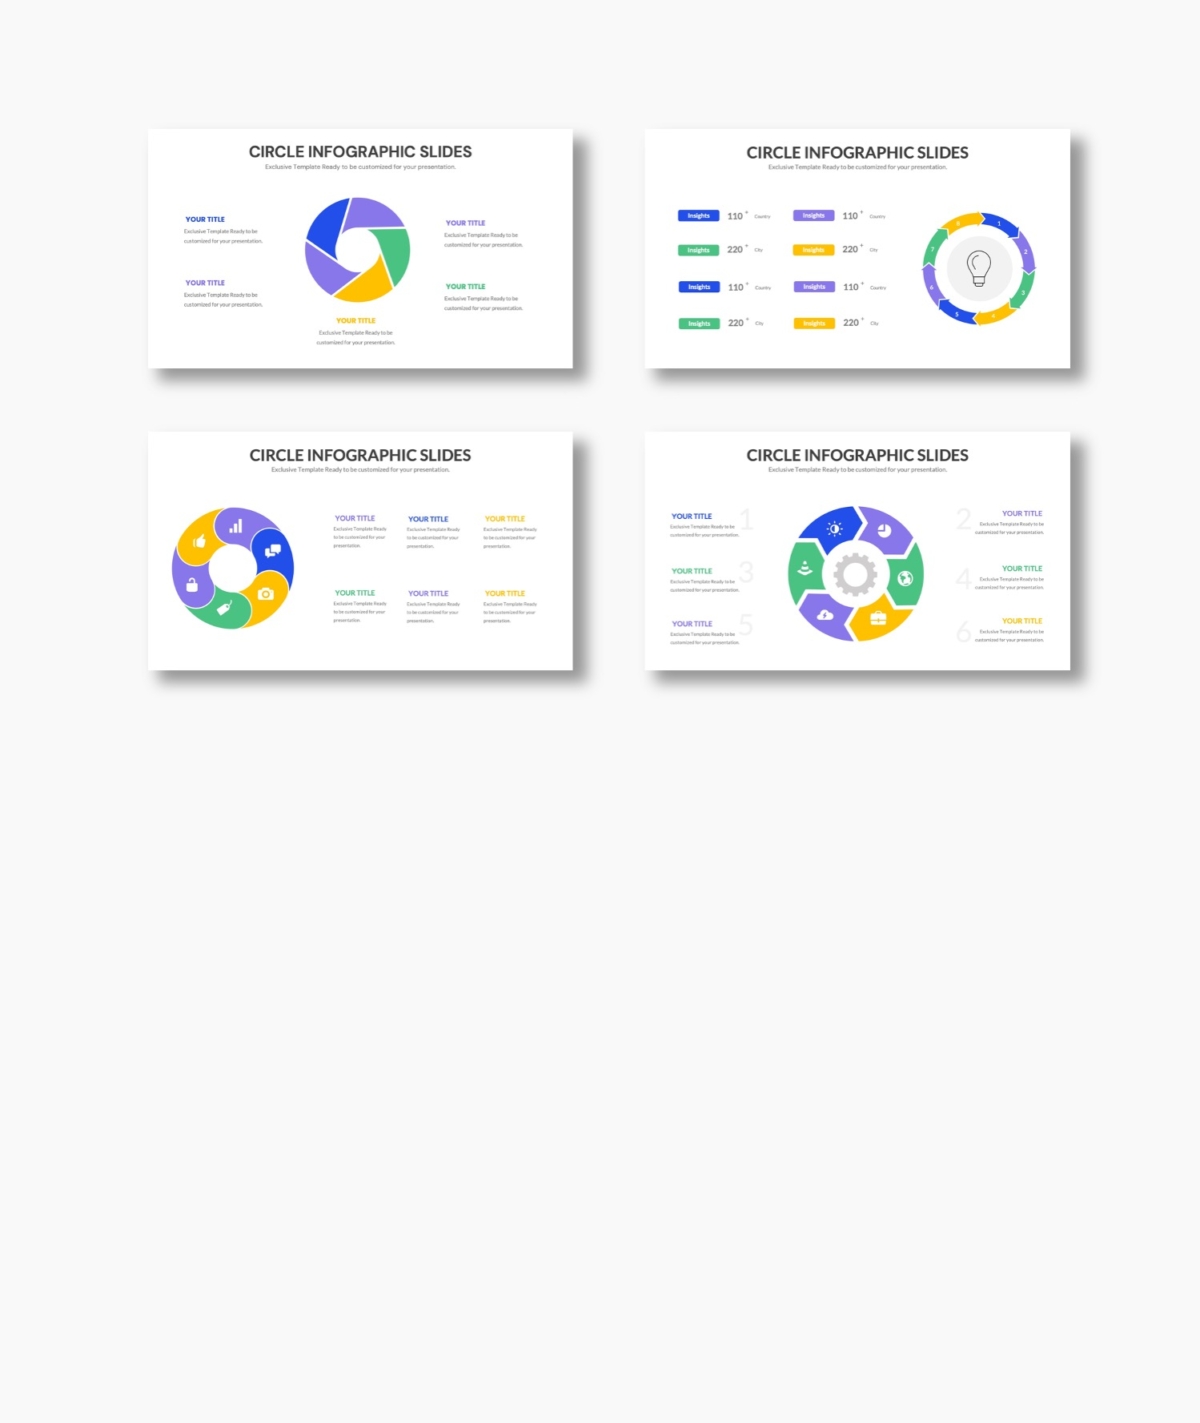 Circle Infographic PowerPoint Slides Template